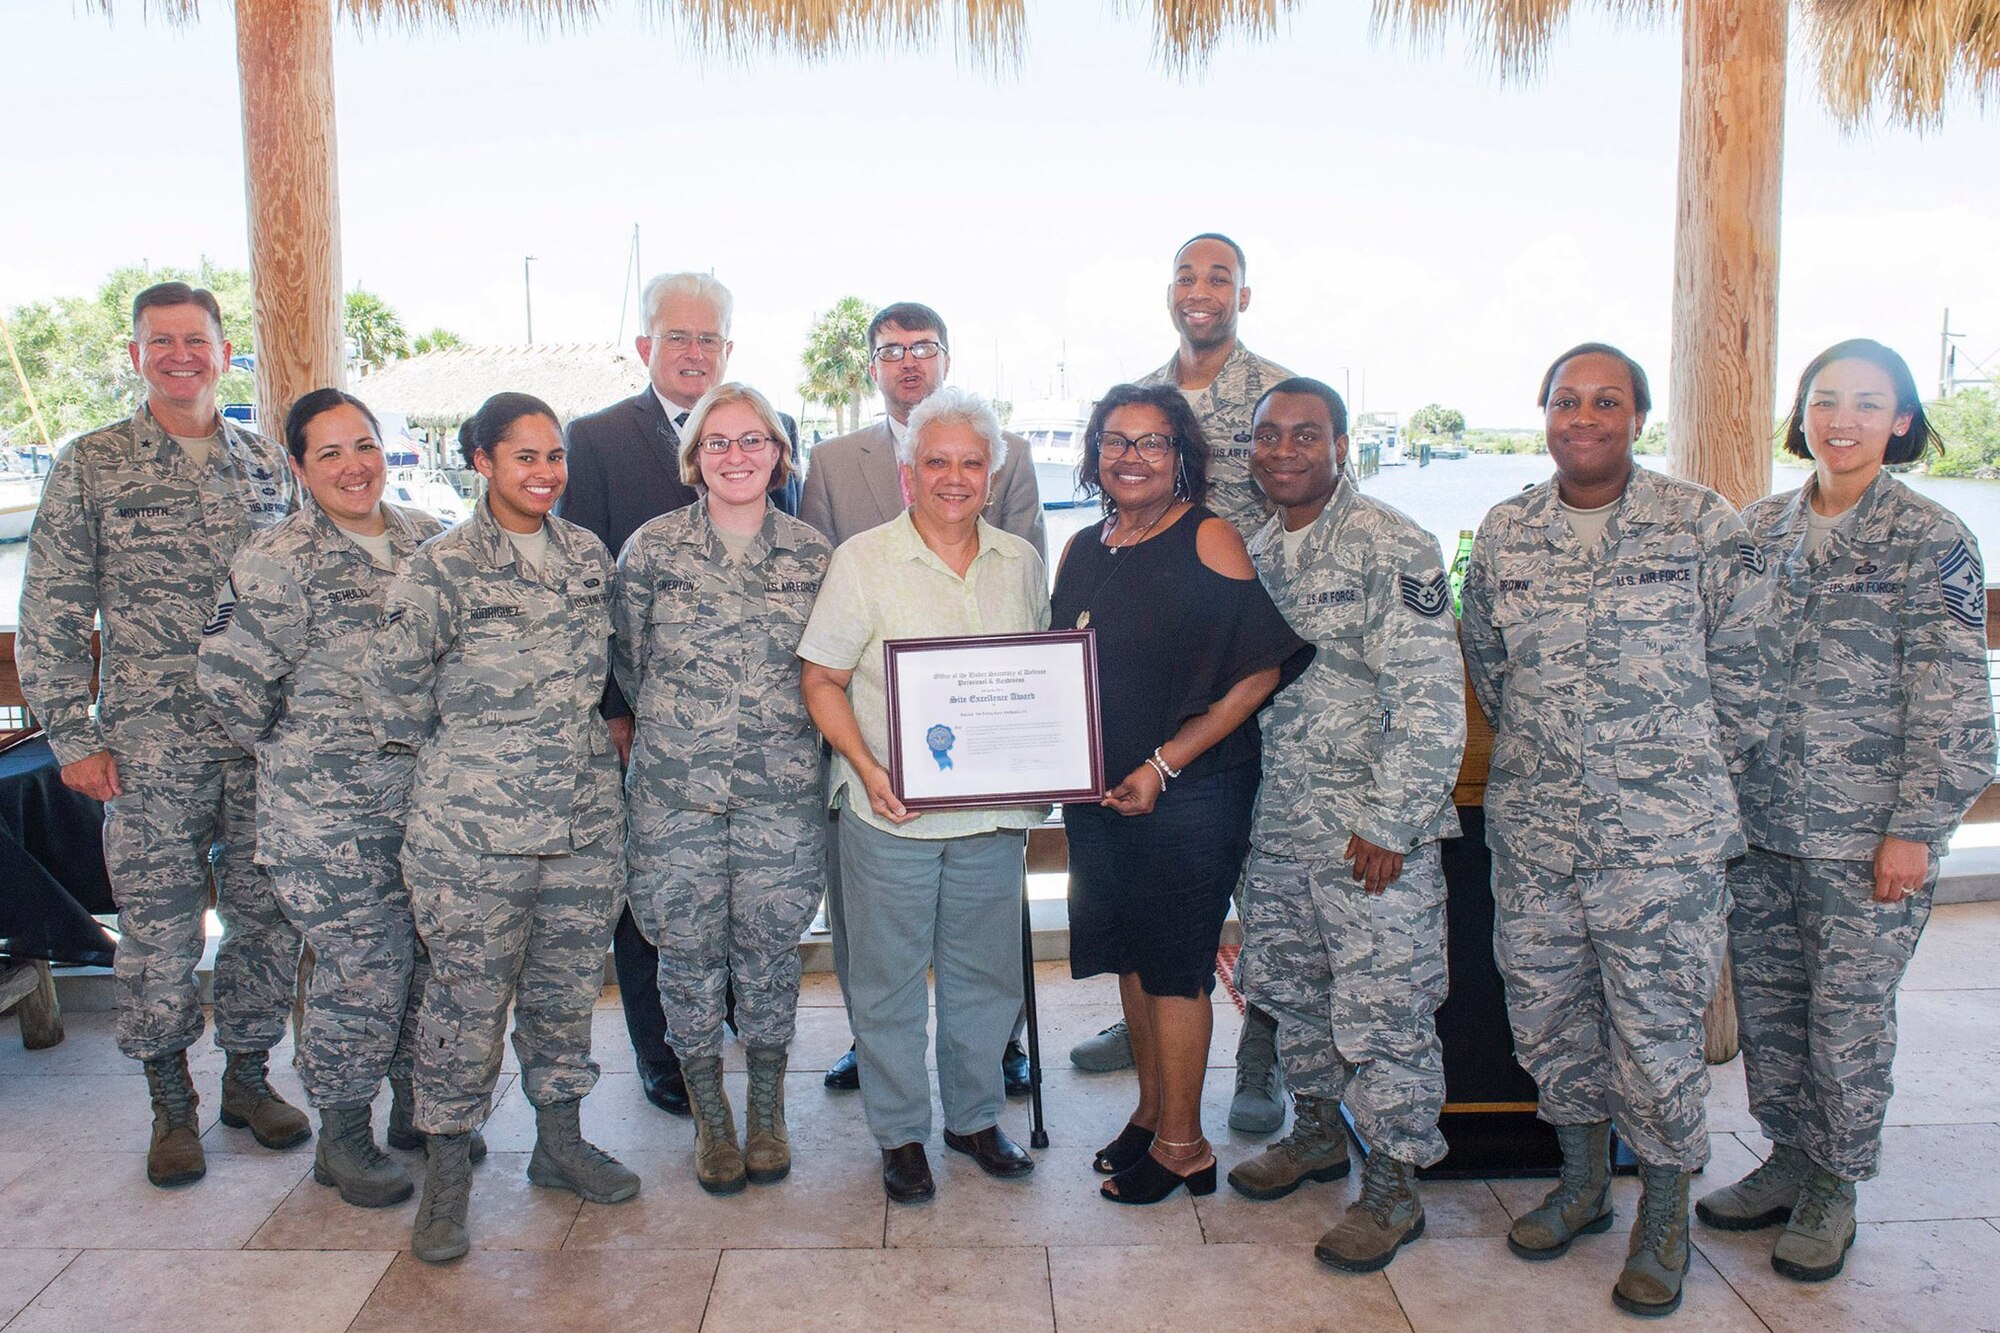 Members from the 45th Force Support Squadron pose for a photo May 17, 2018, with the Site Excellance Award at Patrick Air Force Base, Fla. The award was presented to FSS by Brig. Gen. Wayne Monteith, commander of the 45th Space Wing, for exceptional service and support of DEERS and RAPIDS. (U.S. Air Force photo by Phil Sunkel)